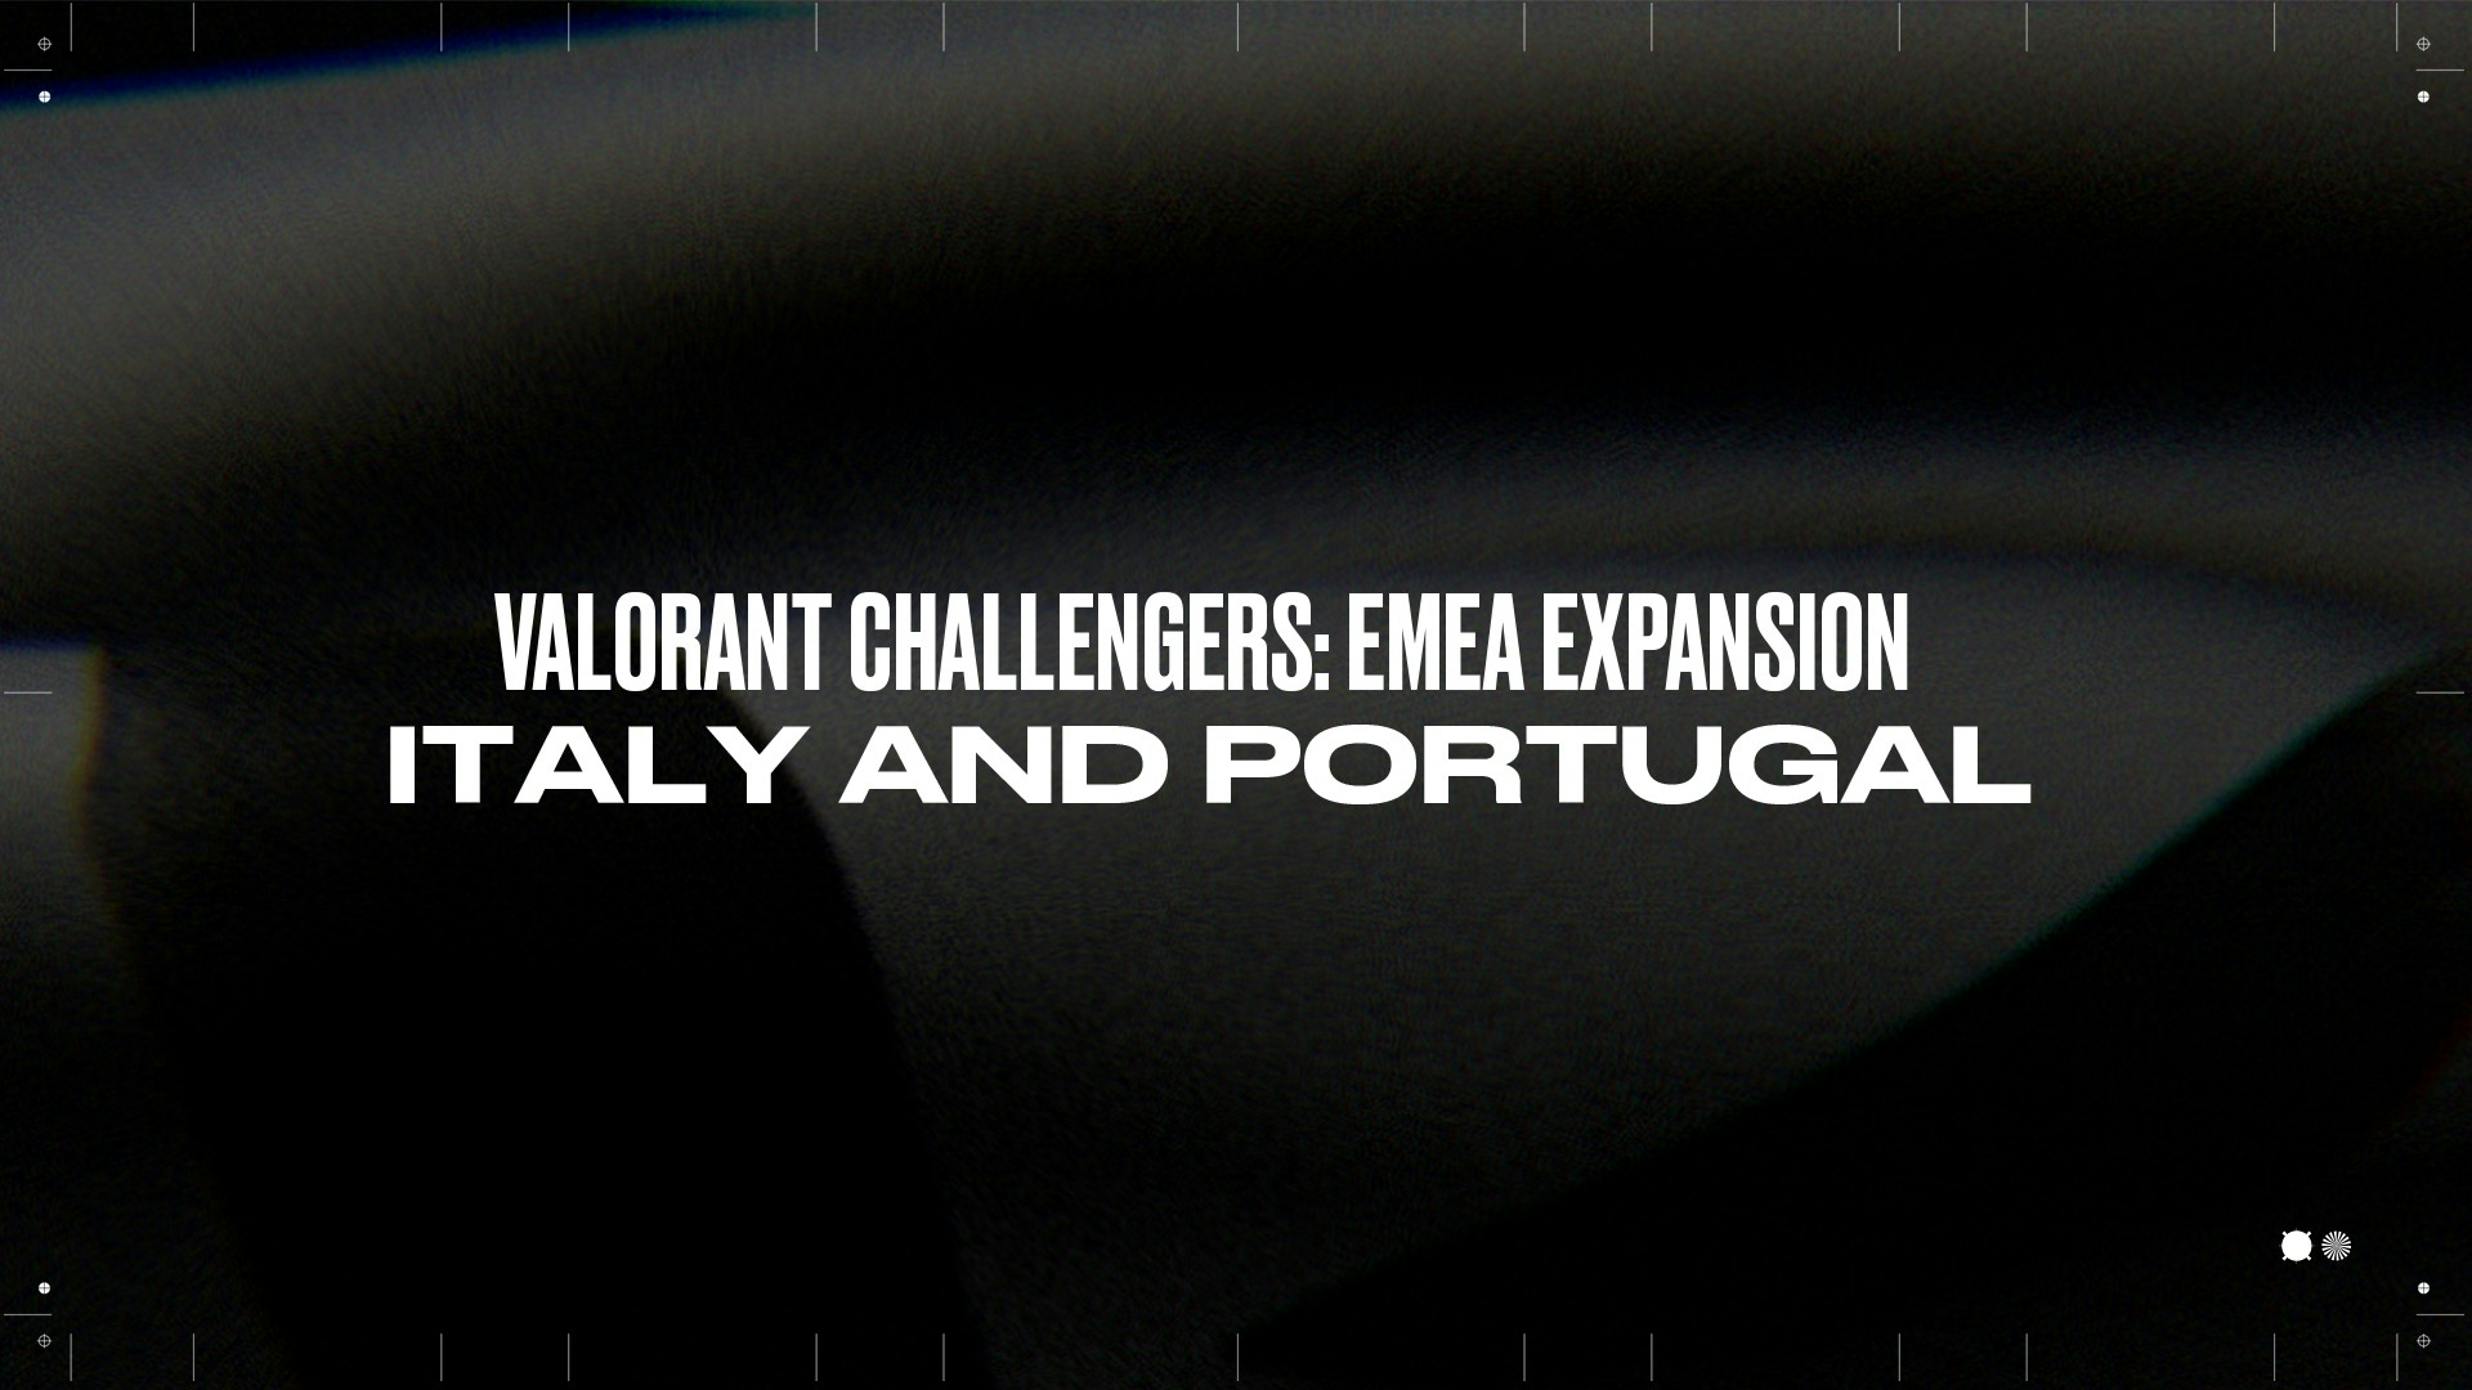 Italy and Portugal to get their own Challengers league